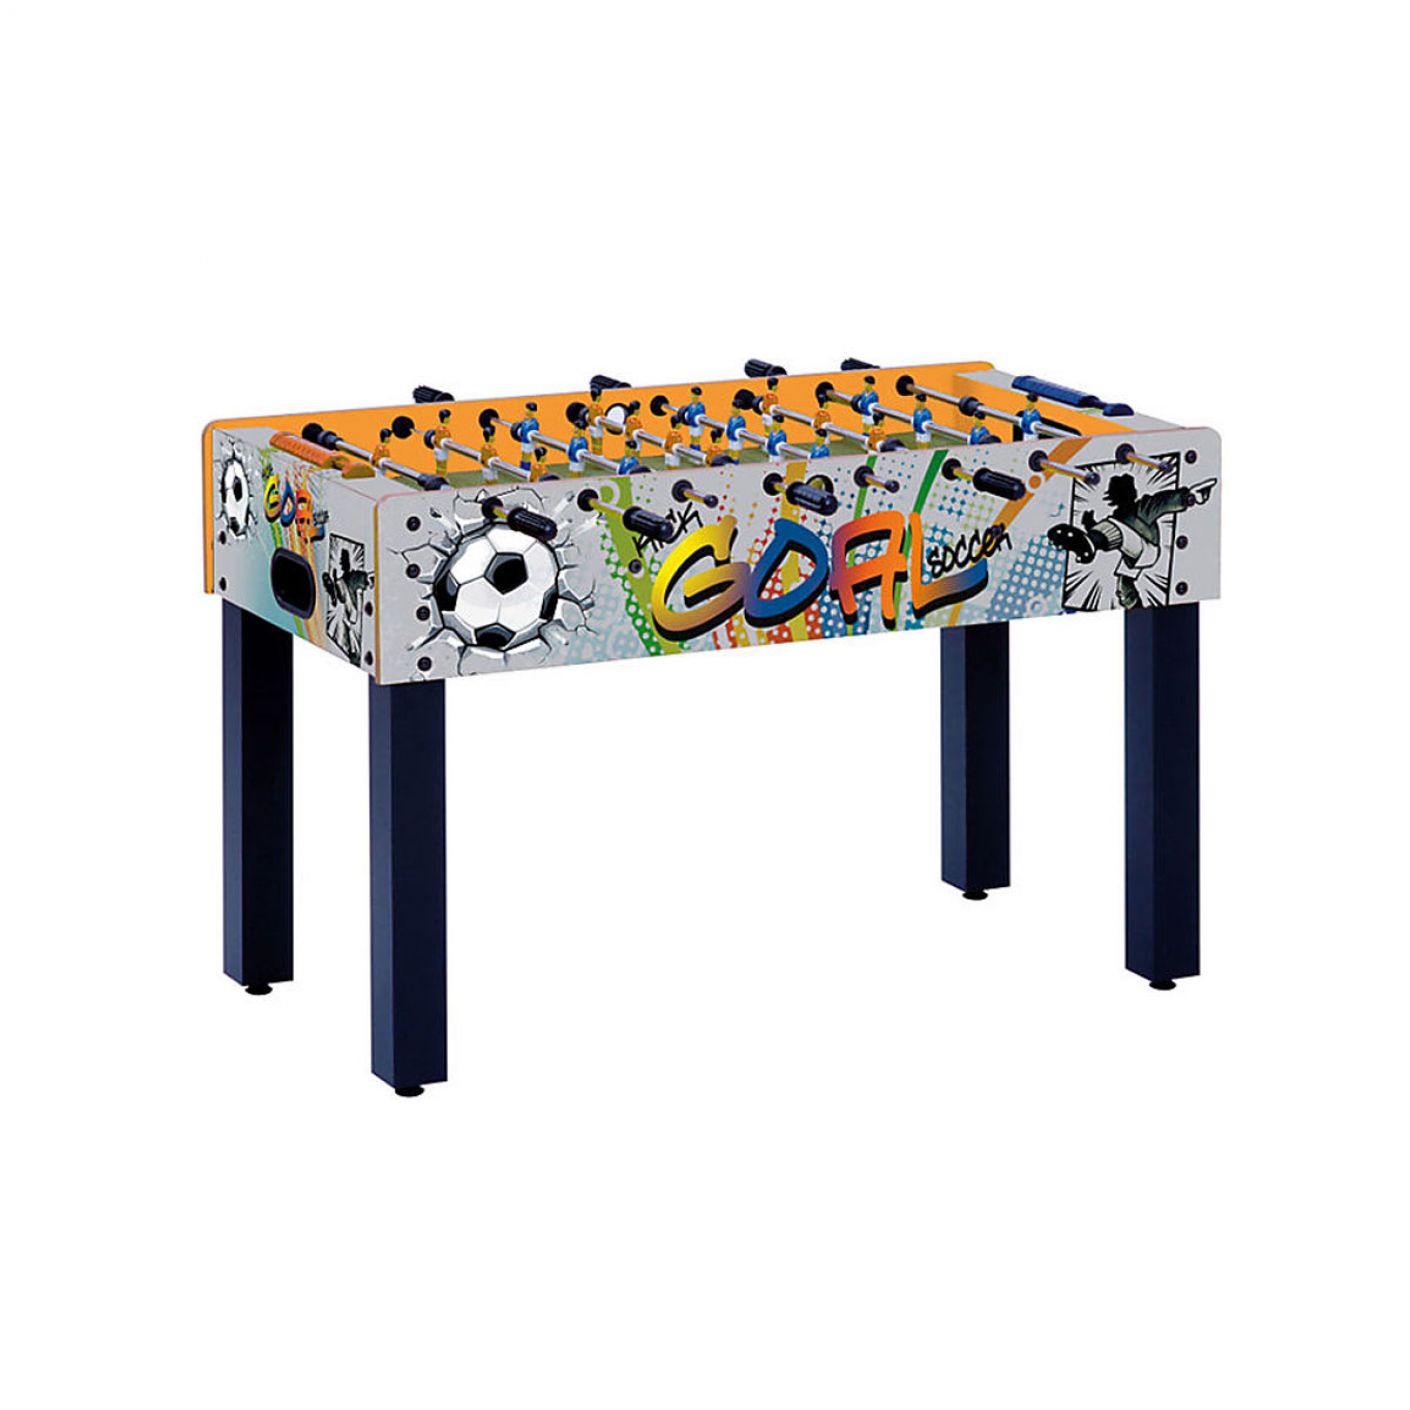 Garlando F-1 table football with GOAL graphics with outgoing temples